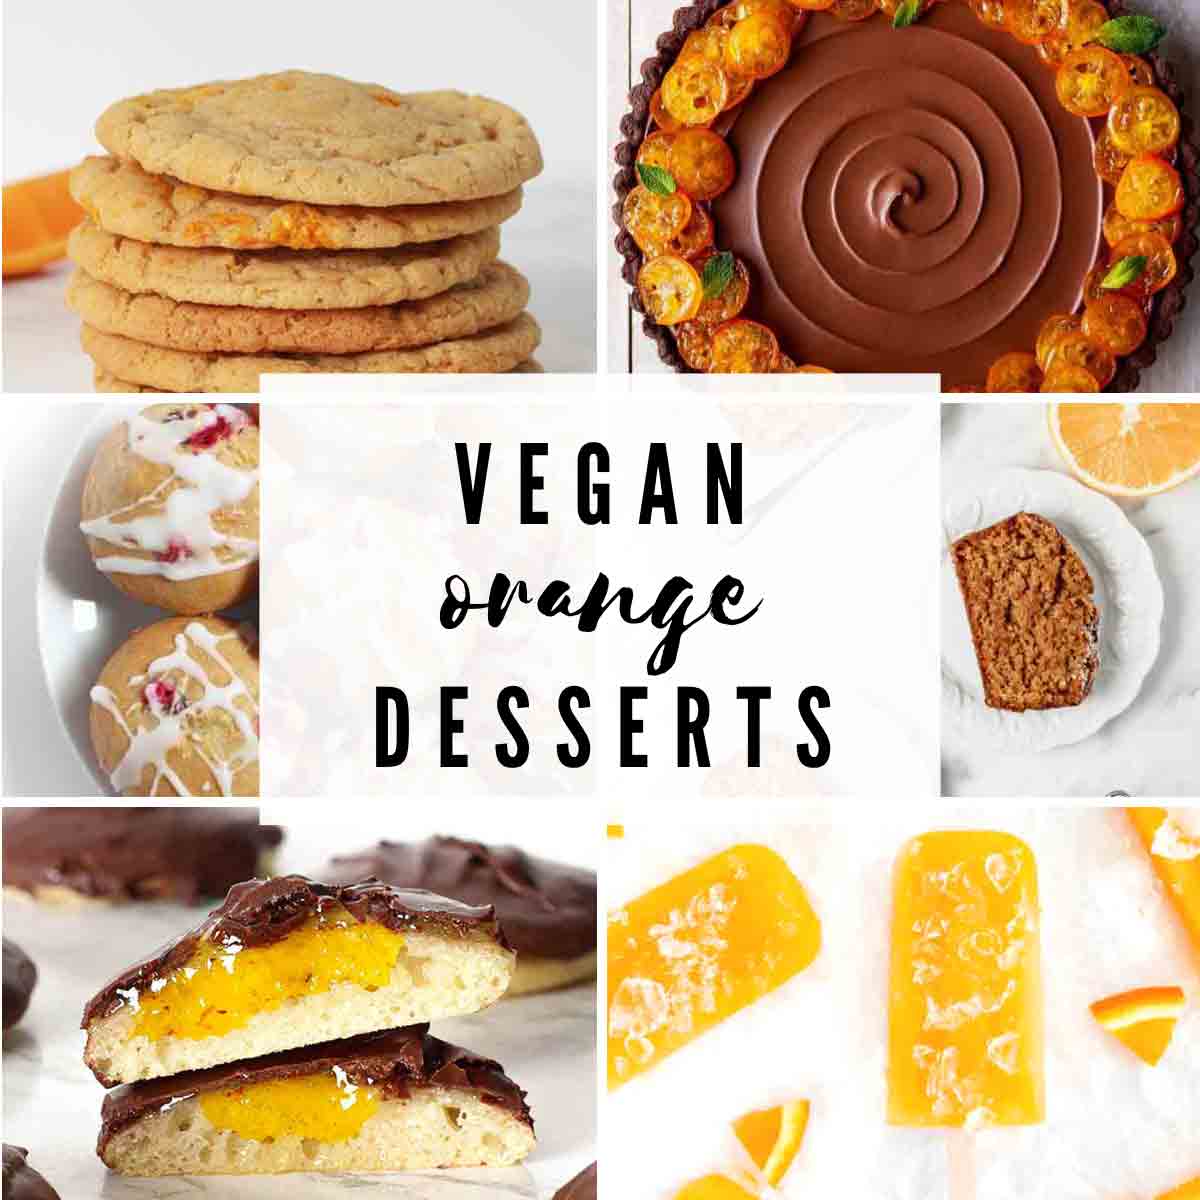 6 Vegan Orange Desserts Images With A Text Overlay